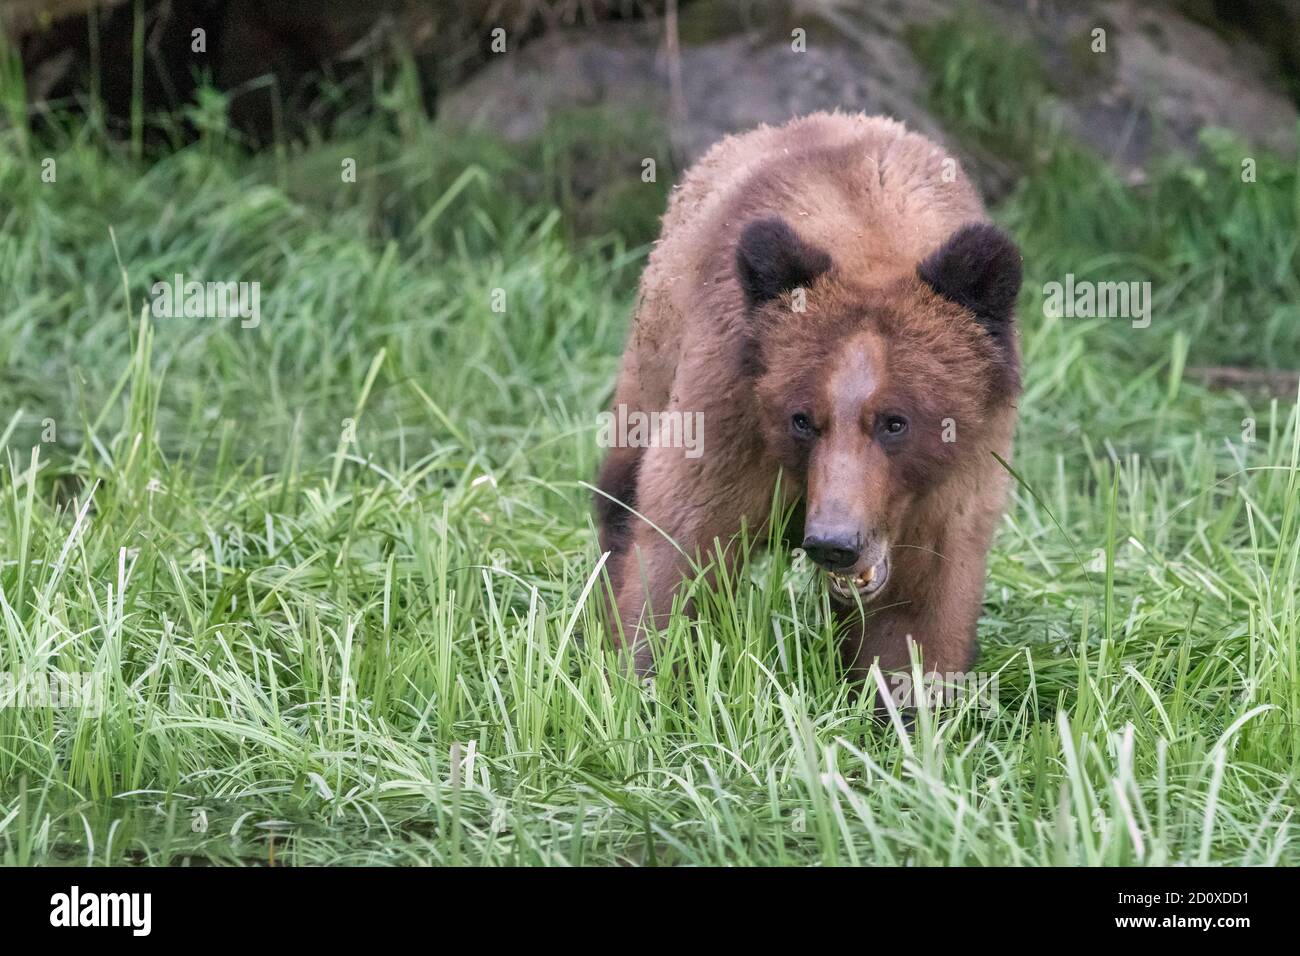 Adult grizzly bear chewing on sedge grass, Khutzeymateen Inlet, BC Stock Photo